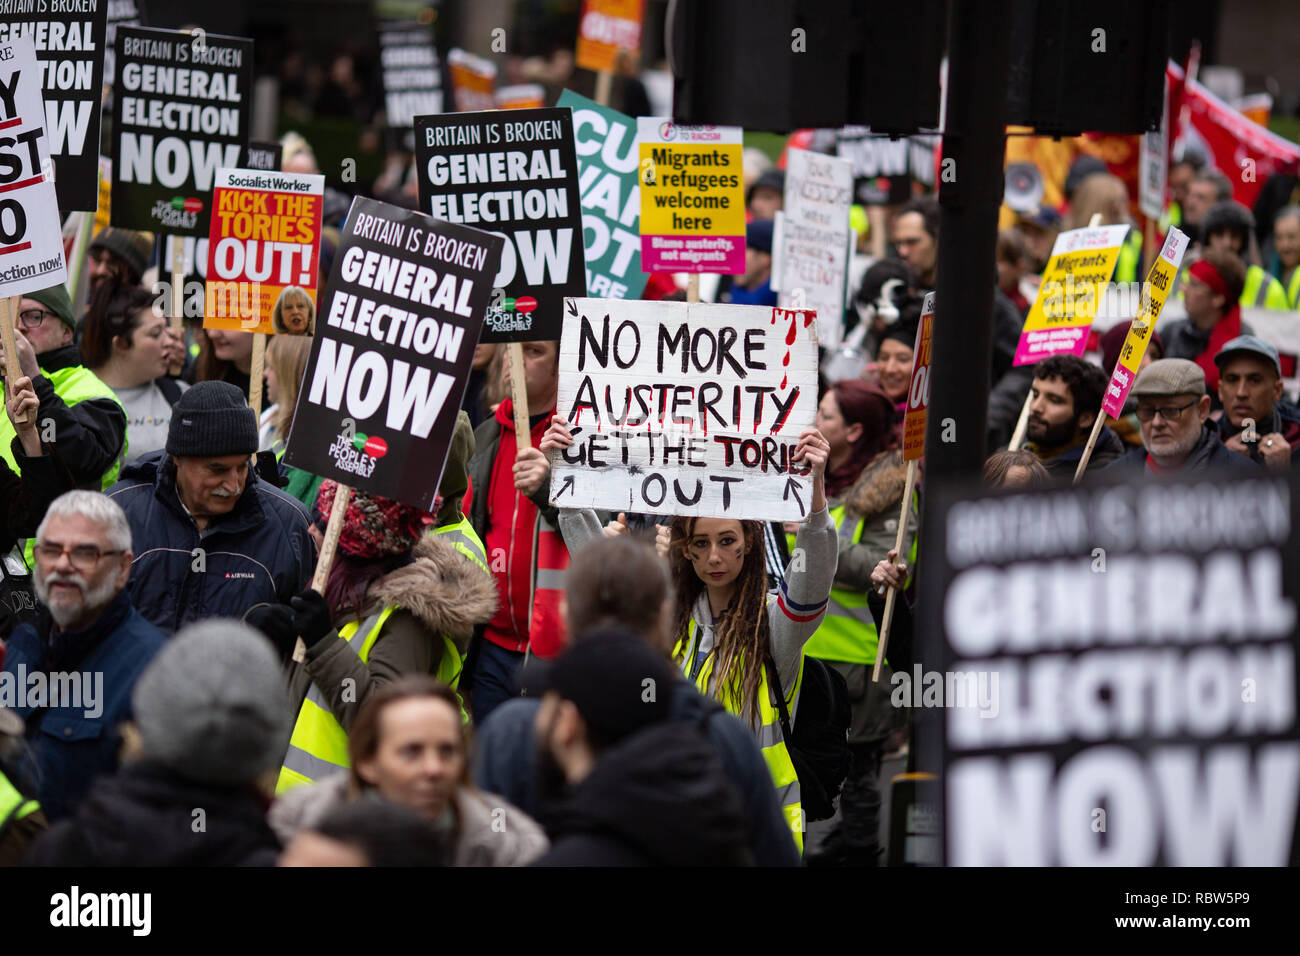 London, UK. 12th Jan, 2018. A demonstrator seen holding up a 'no more austerity, get the tories out' placard during the protest.Thousands rallied in central London for the 'People's Assembly against Austerity' inspired by the French 'Yellow Vest' protests bringing attention to austerity programs that have hit the poor hard. Credit: Ryan Ashcroft/SOPA Images/ZUMA Wire/Alamy Live News Stock Photo